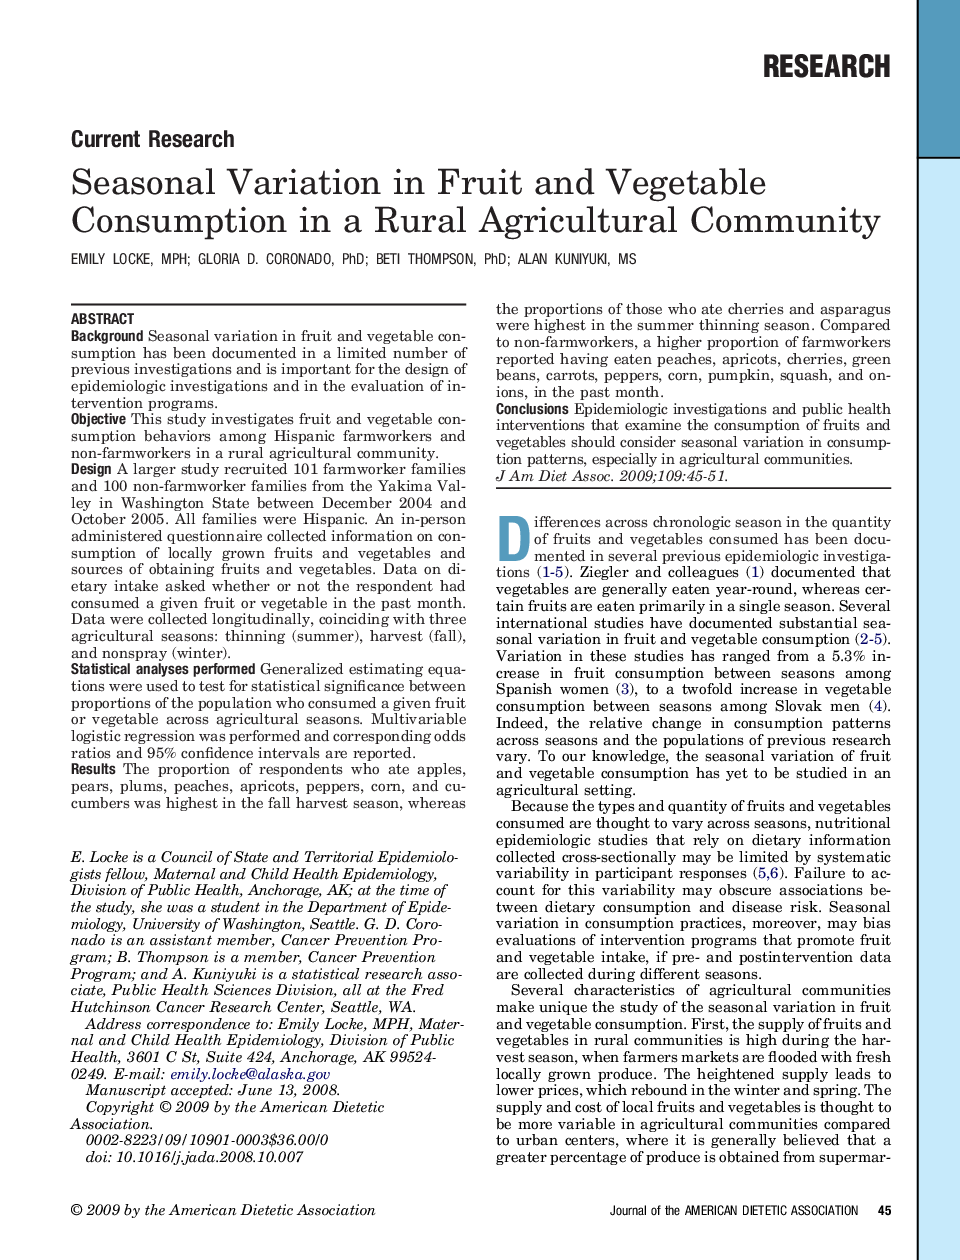 Seasonal Variation in Fruit and Vegetable Consumption in a Rural Agricultural Community